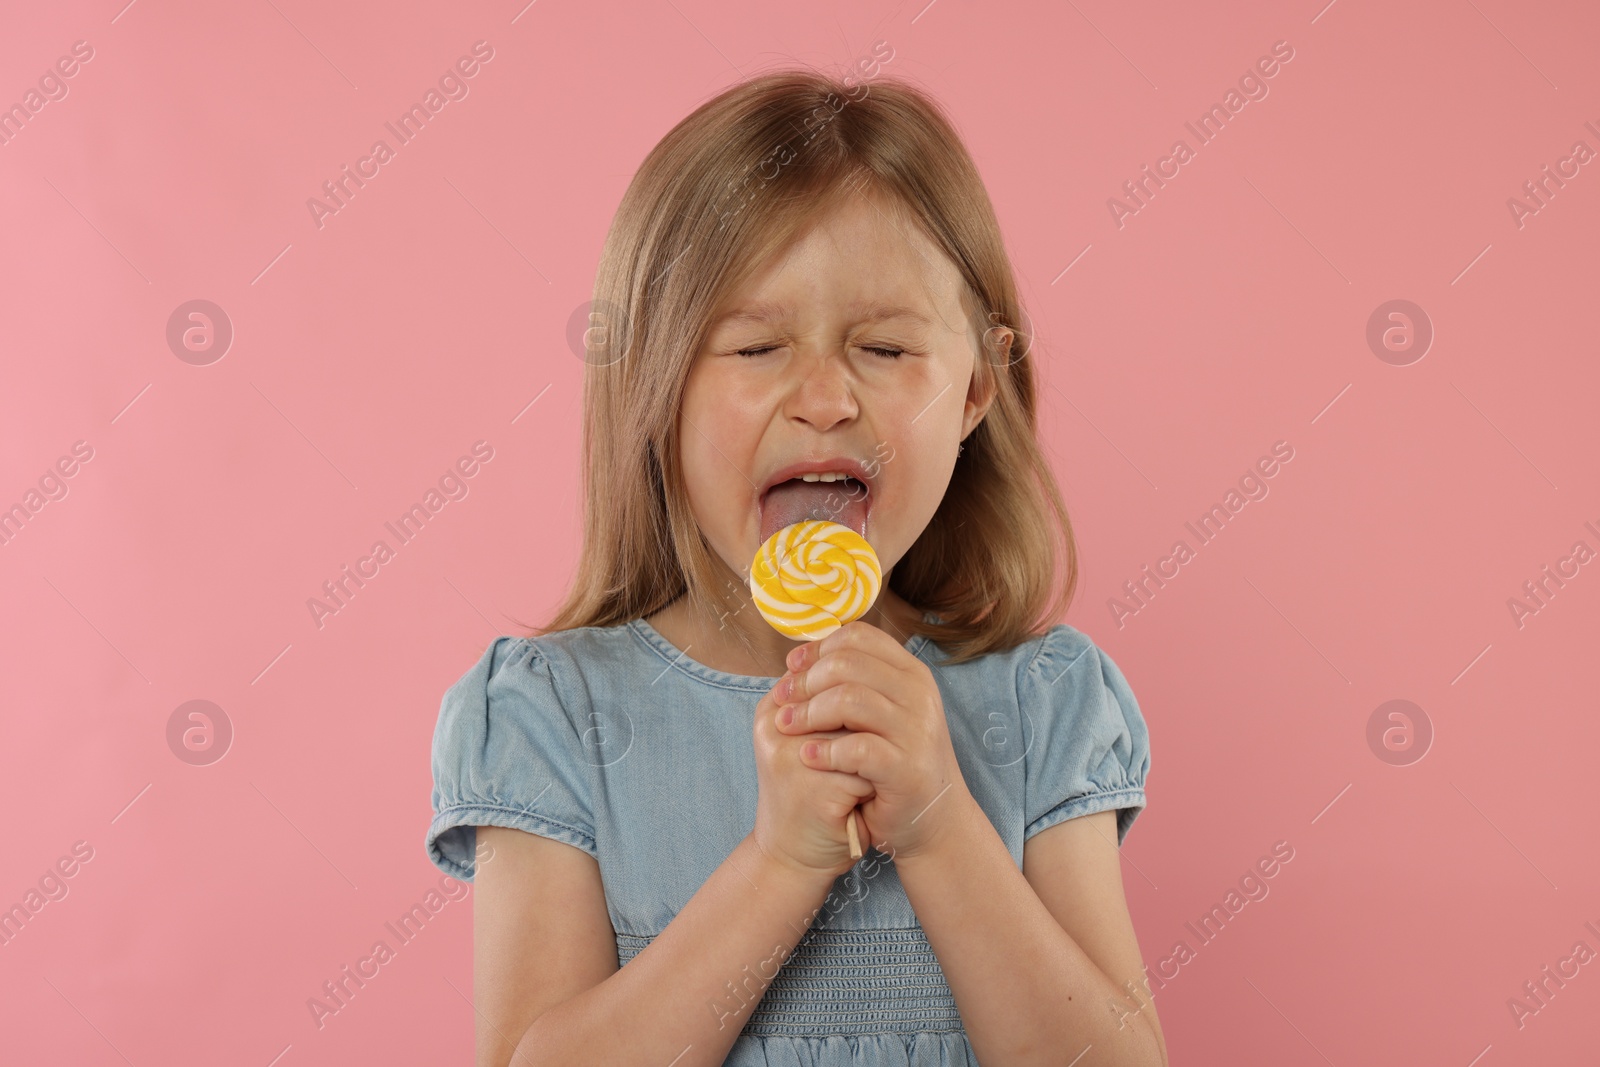 Photo of Cute girl licking lollipop on pink background